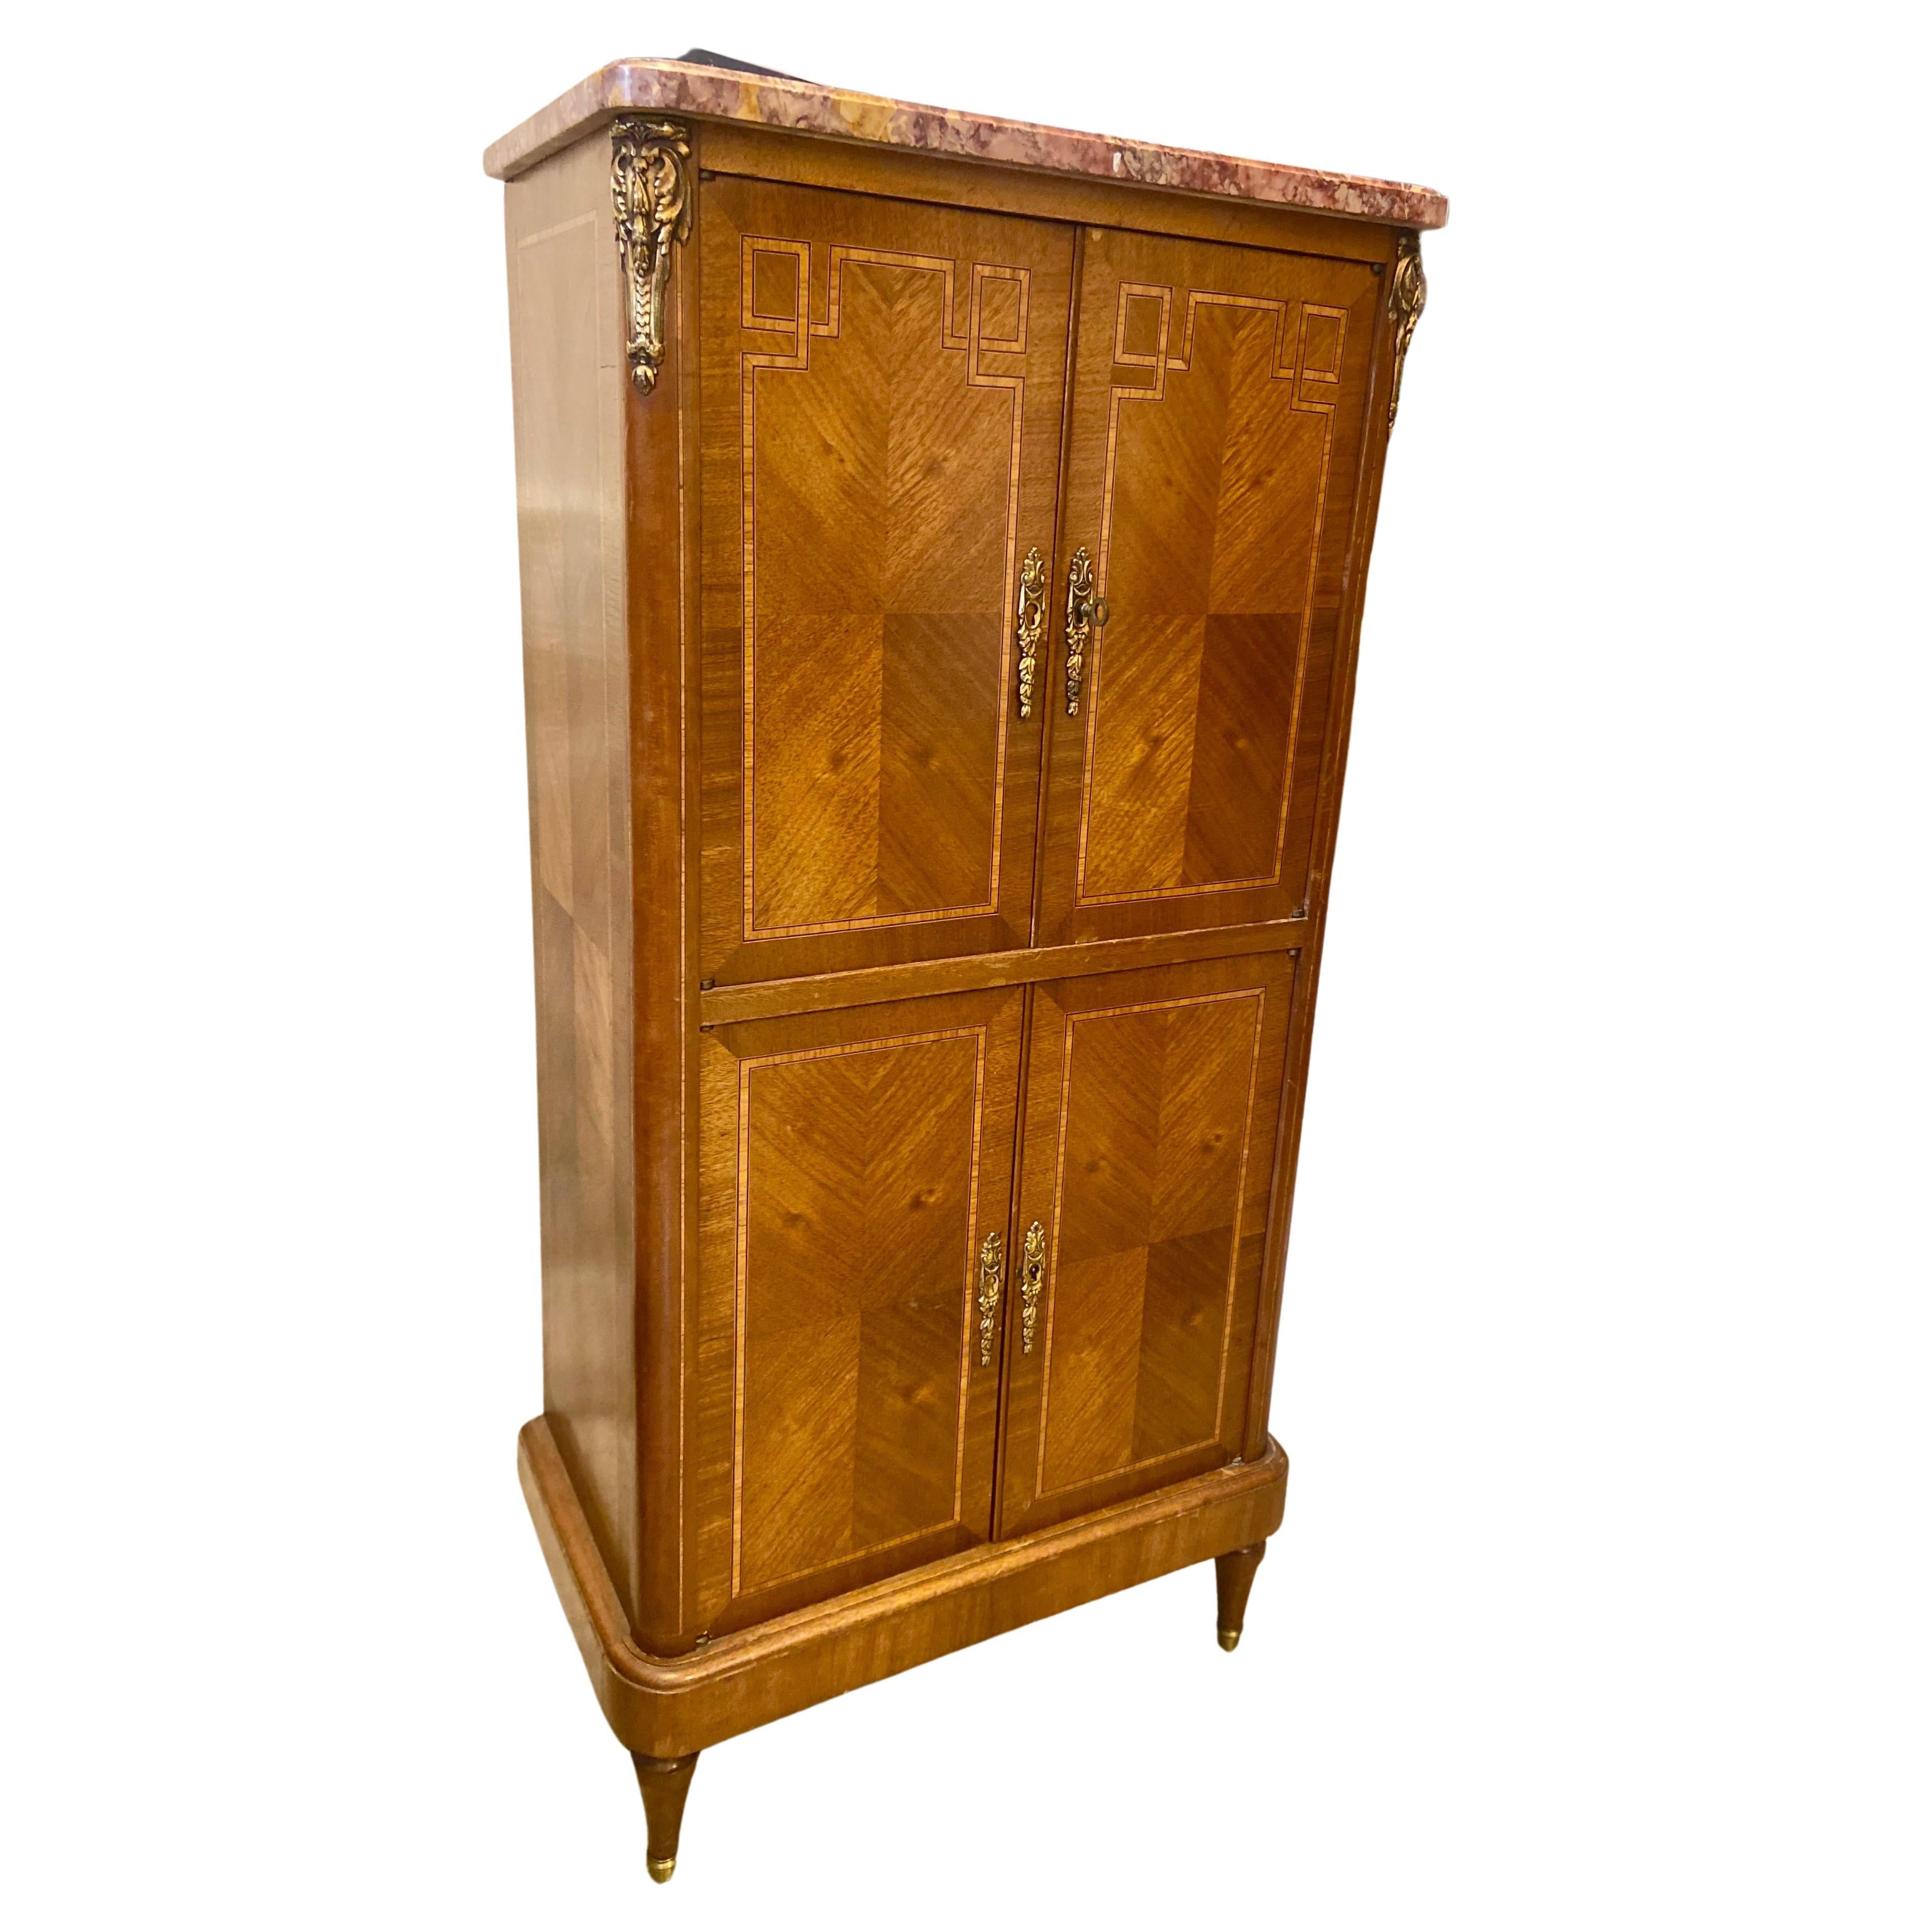 19th Century French Marble Top Inlaid Mahogany Cabinet or Dry Bar For Sale